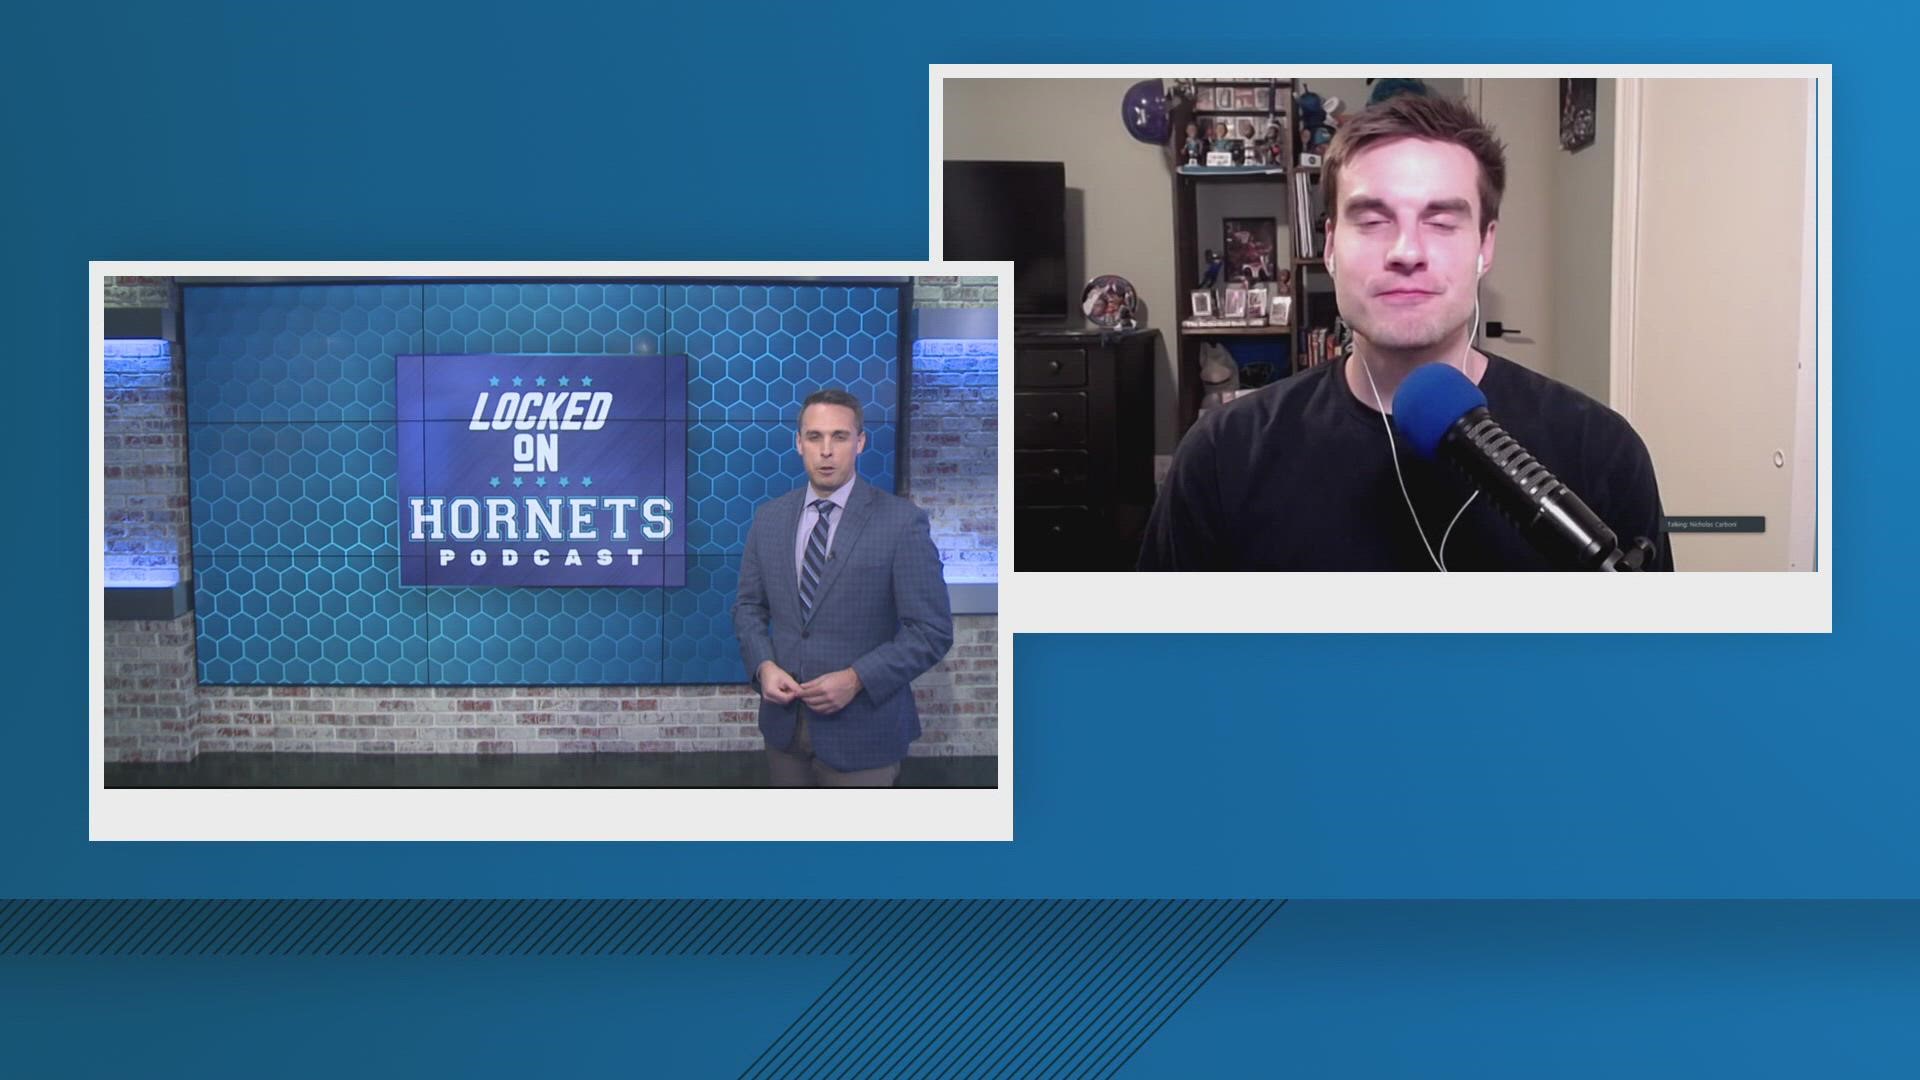 Locked On Hornets and WCNC Charlotte discuss LaMelo Ball's latest ankle injury, and if his four significant ankle this season are cause for concern going forward.